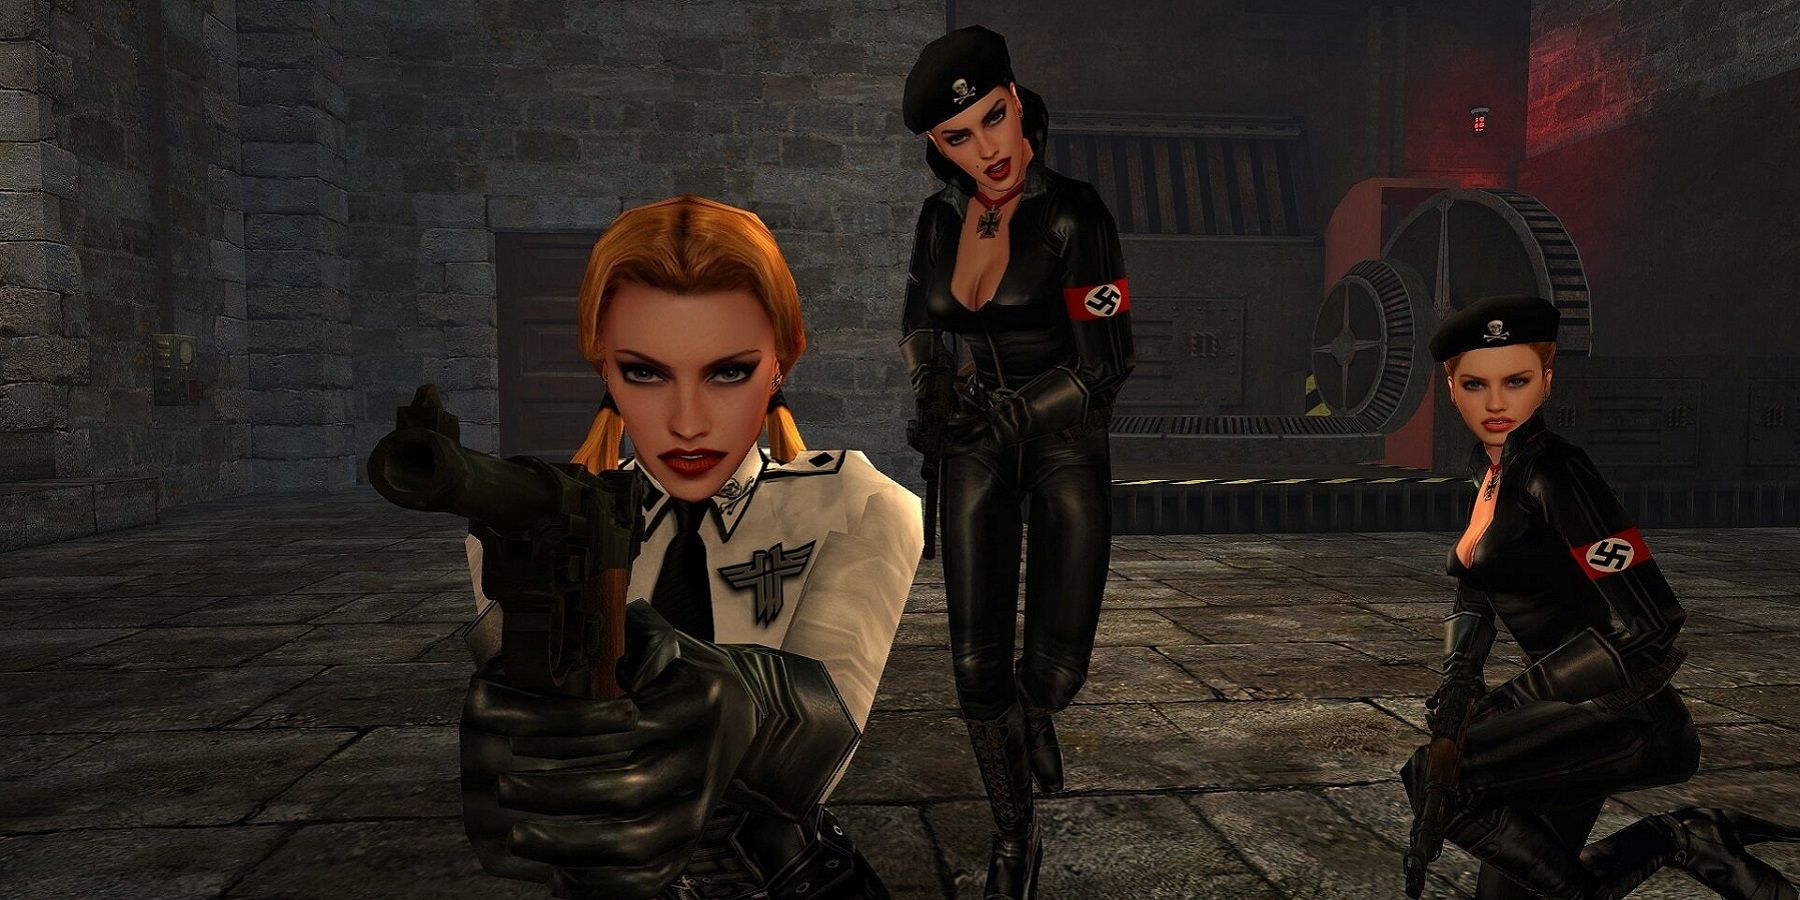 Screenshot from Return to Castle Wolfenstein showing three elite soldiers about to attack.